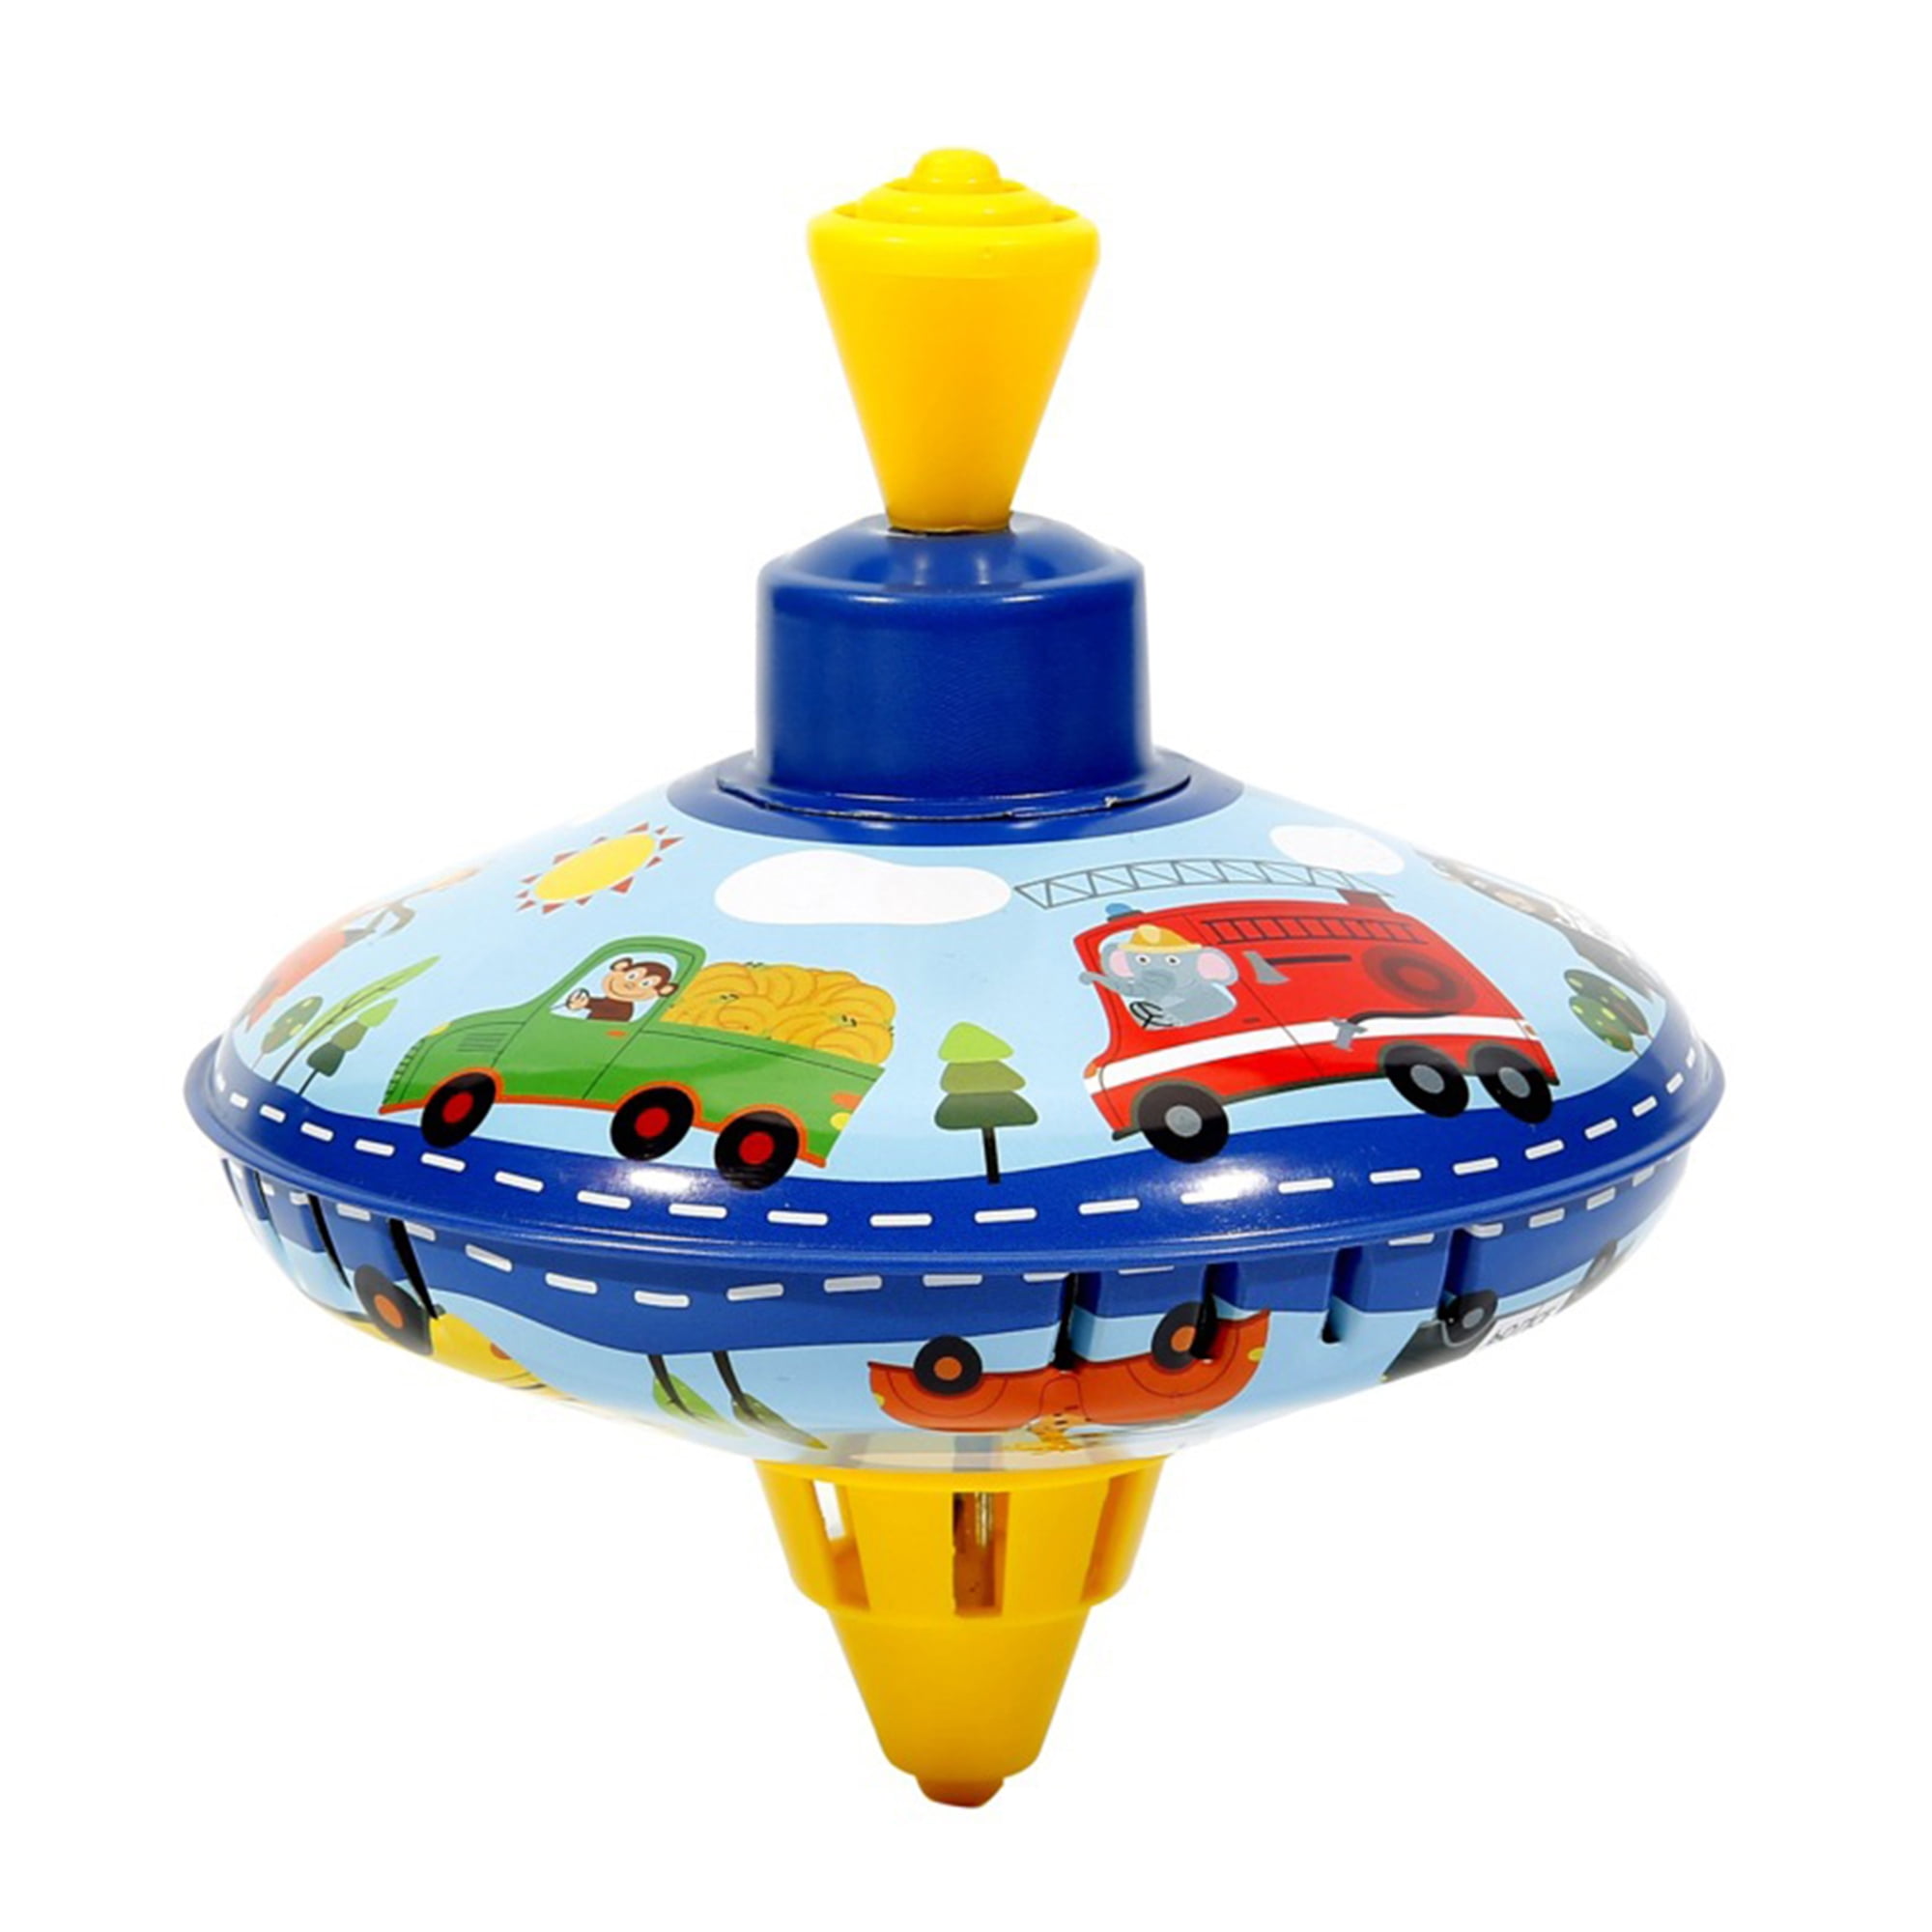 Metal Flip Over Top Gyro Spinning Top Toys Kids Educational Toy Gifts 